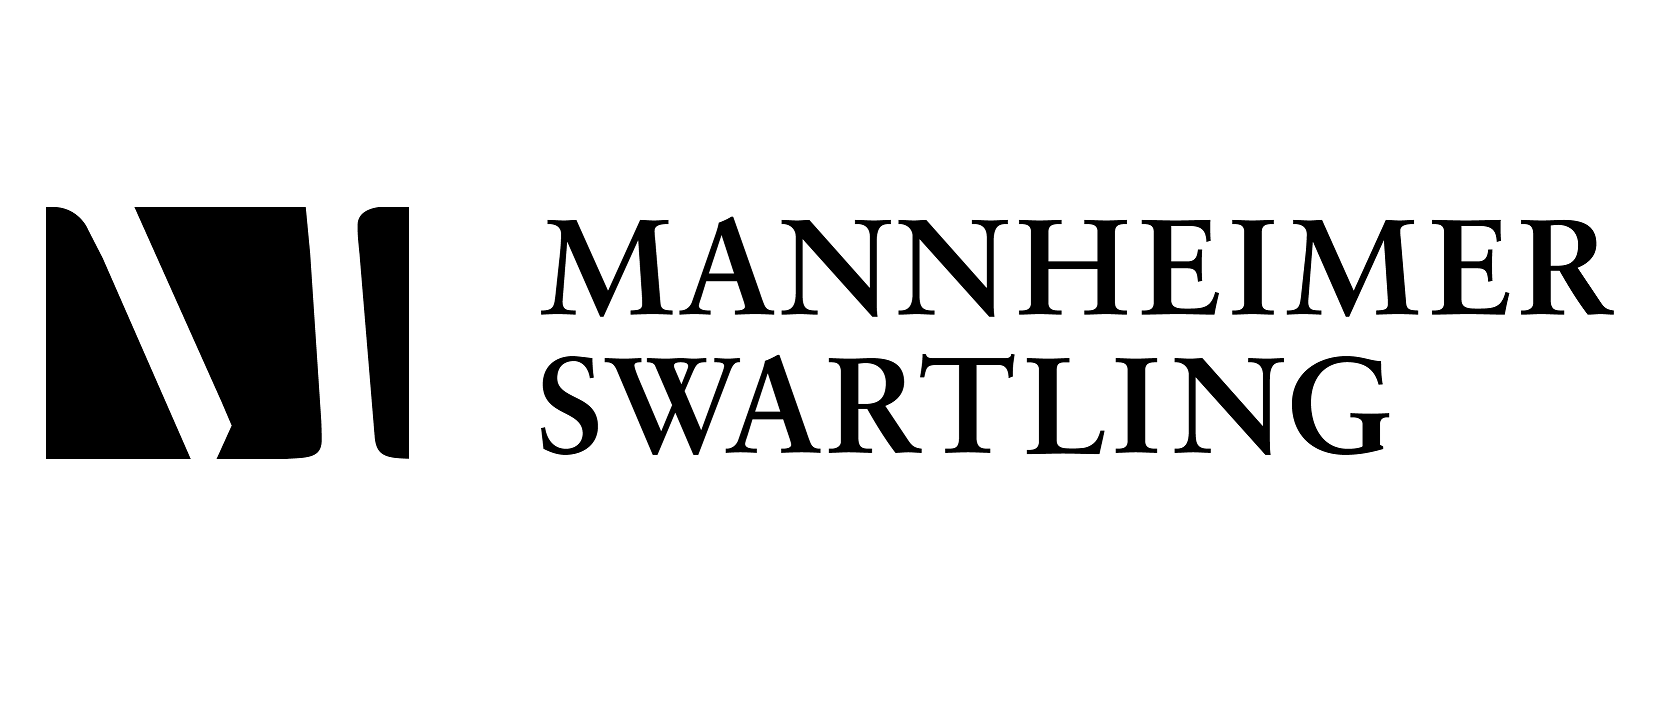 Mannheimer Swartling has Advised DocMorris on IT Outsourcing Agreement with Logica